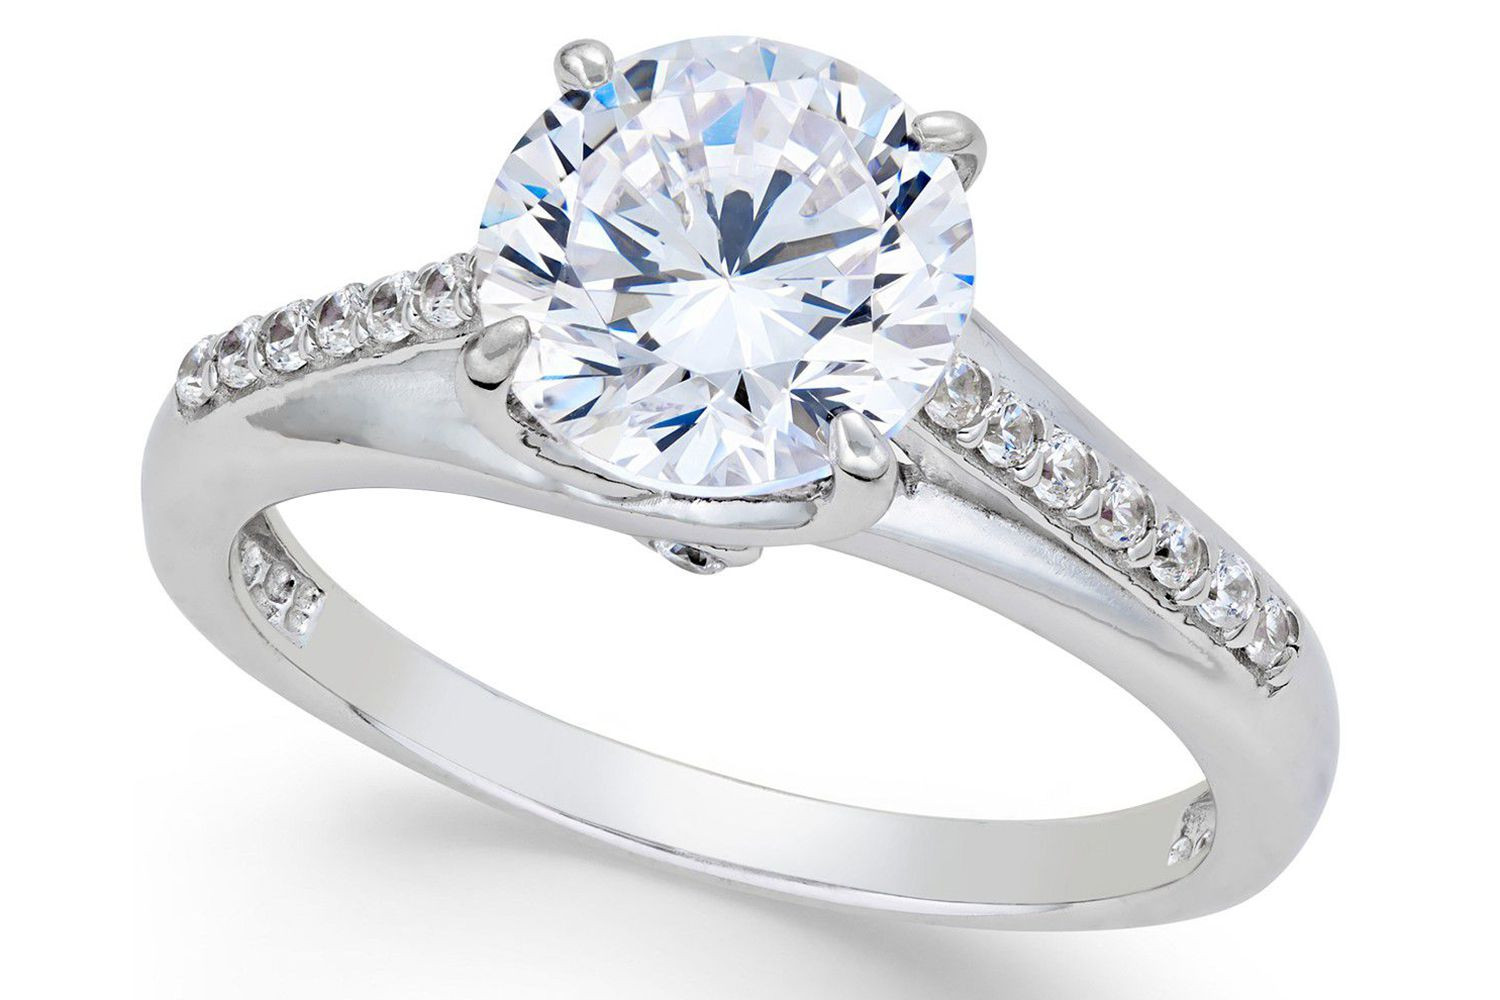 Pictures Of Diamond Rings
 The 6 Best Fake Engagement Rings to Wear When You Travel